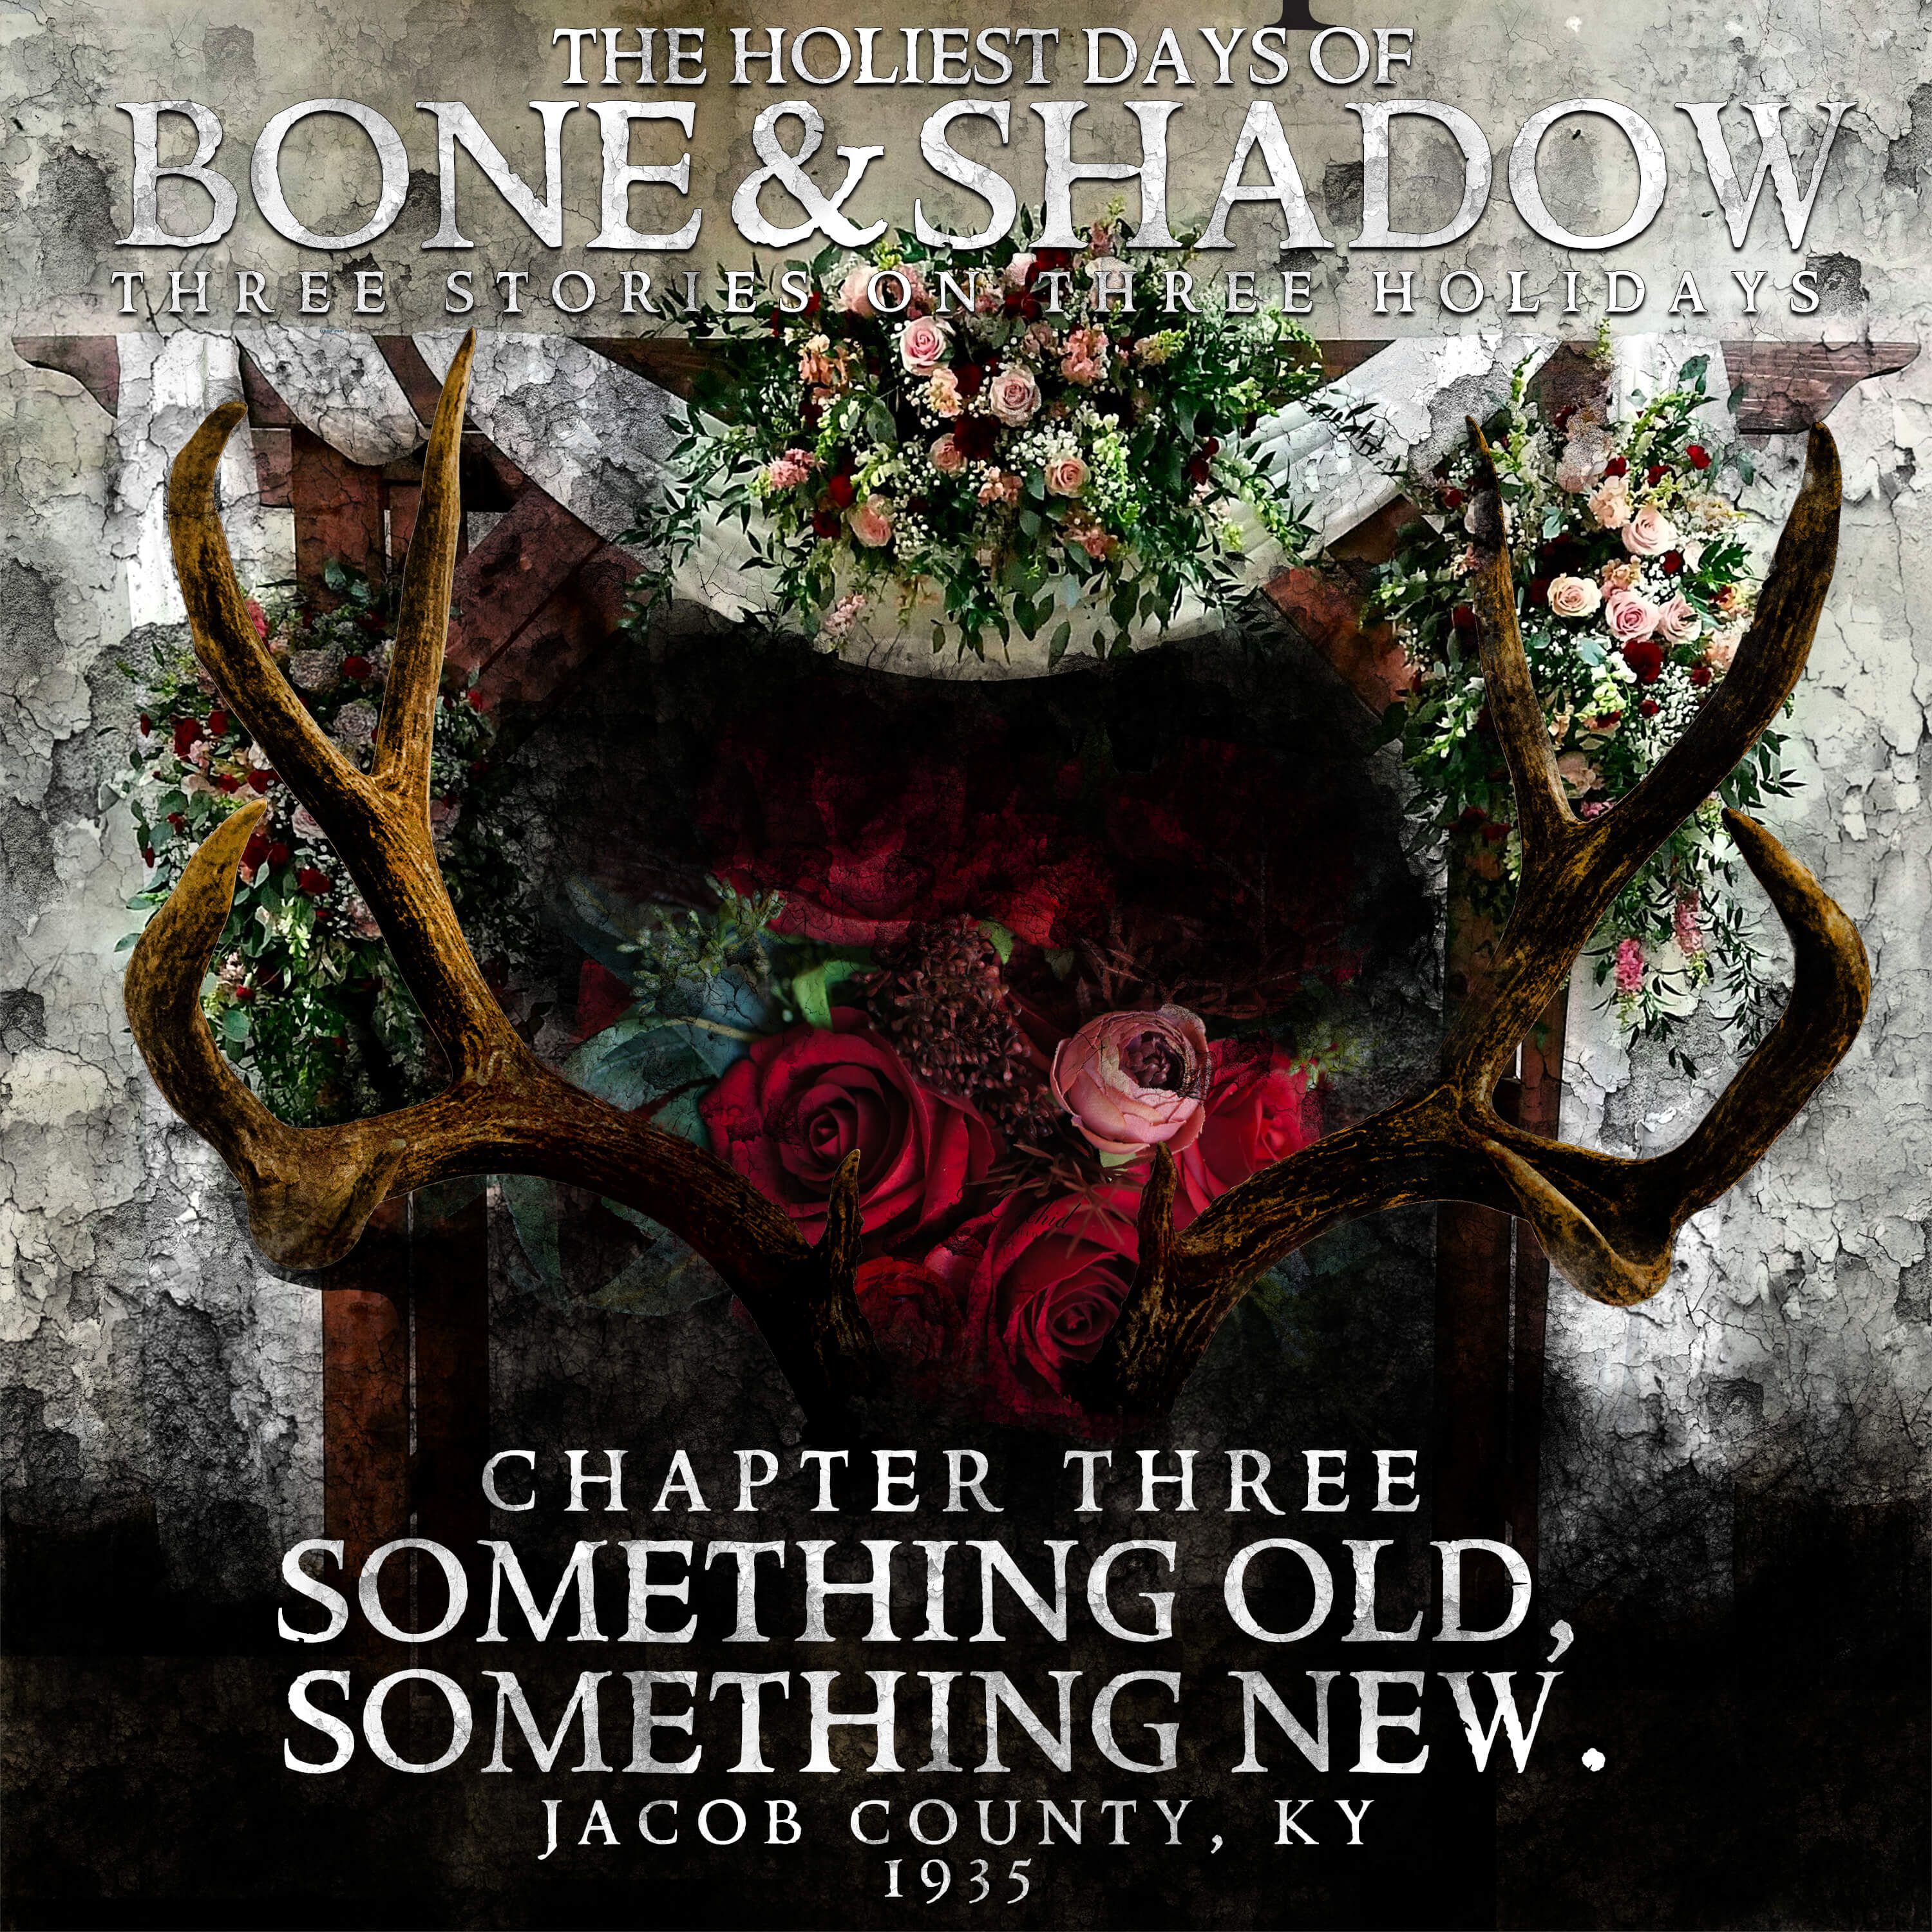 The Holiest Days of Bone and Shadow, Chapter Three: Something Old, Something New